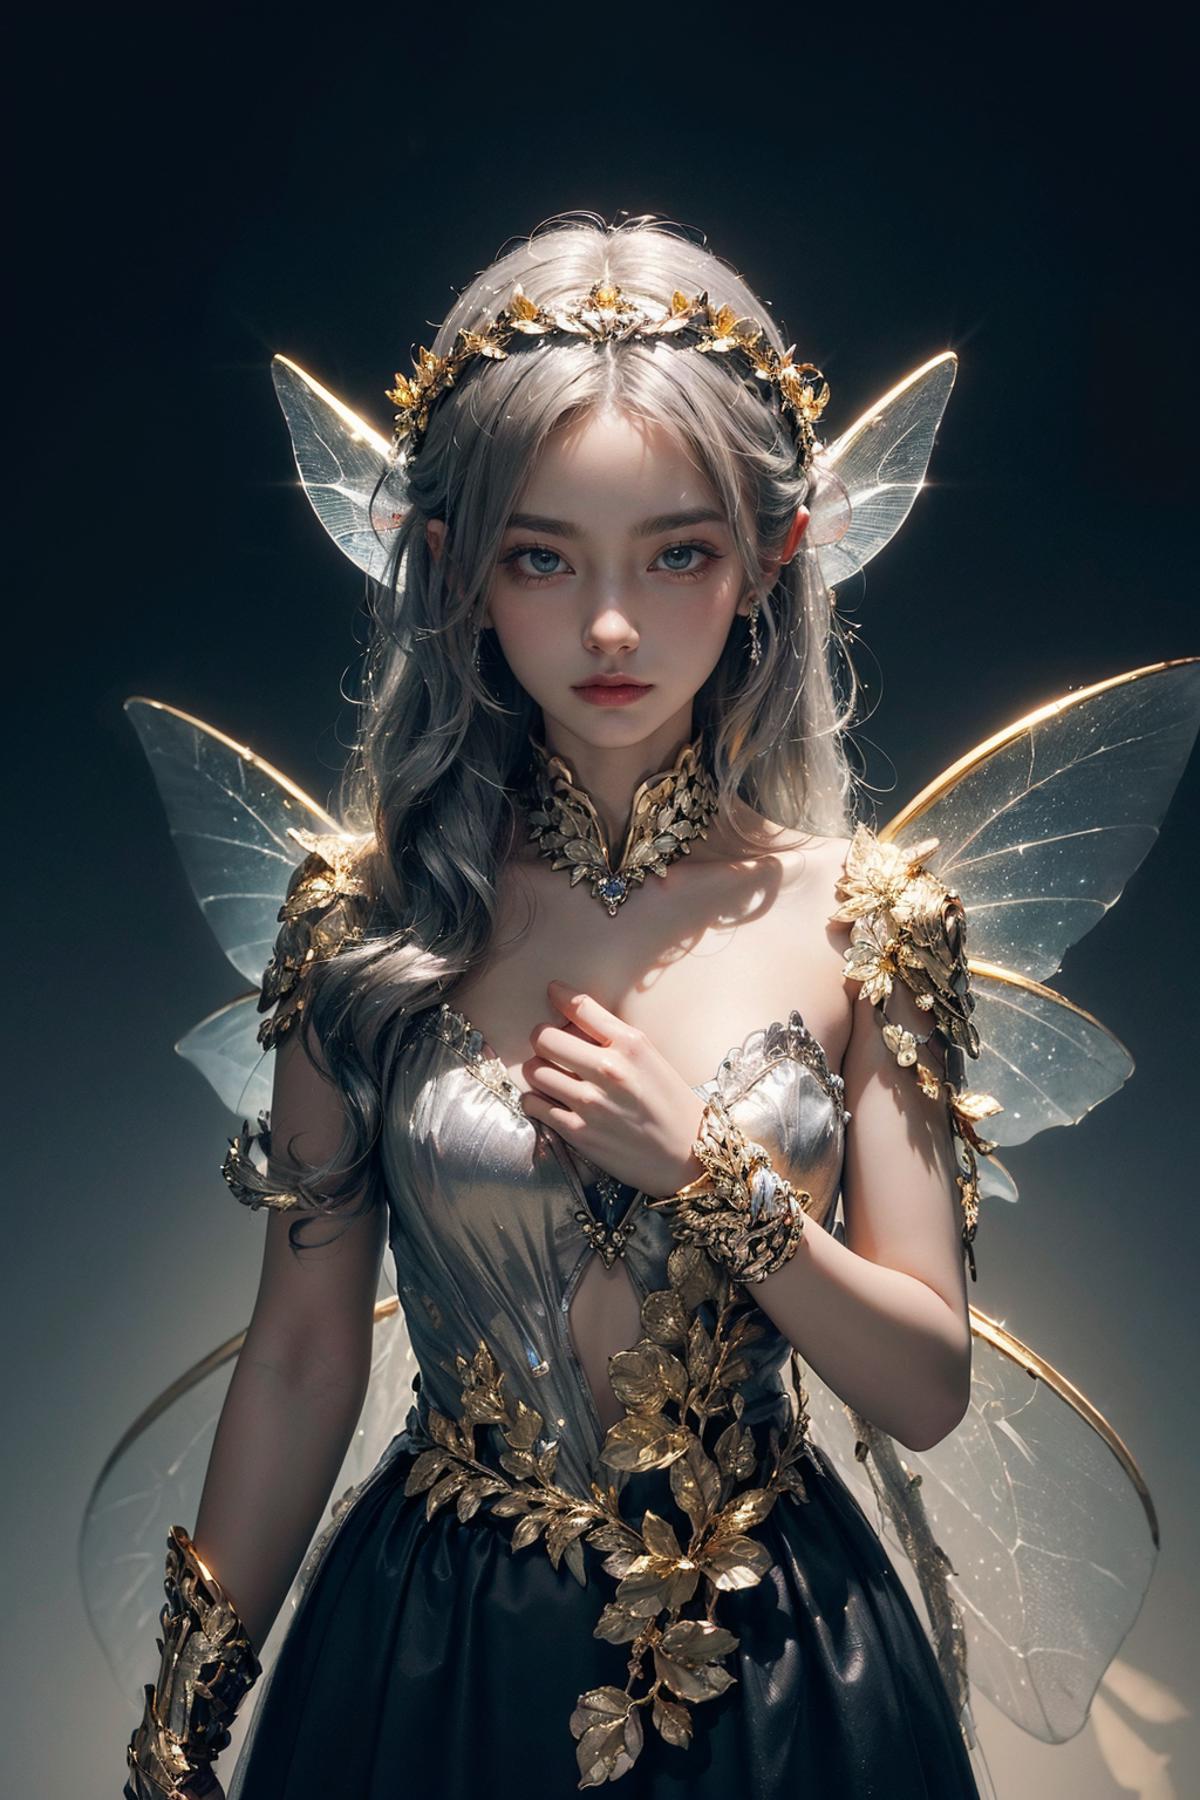 A beautifully rendered digital image of a young woman wearing a gold crown and a gold necklace, dressed as a fairy.